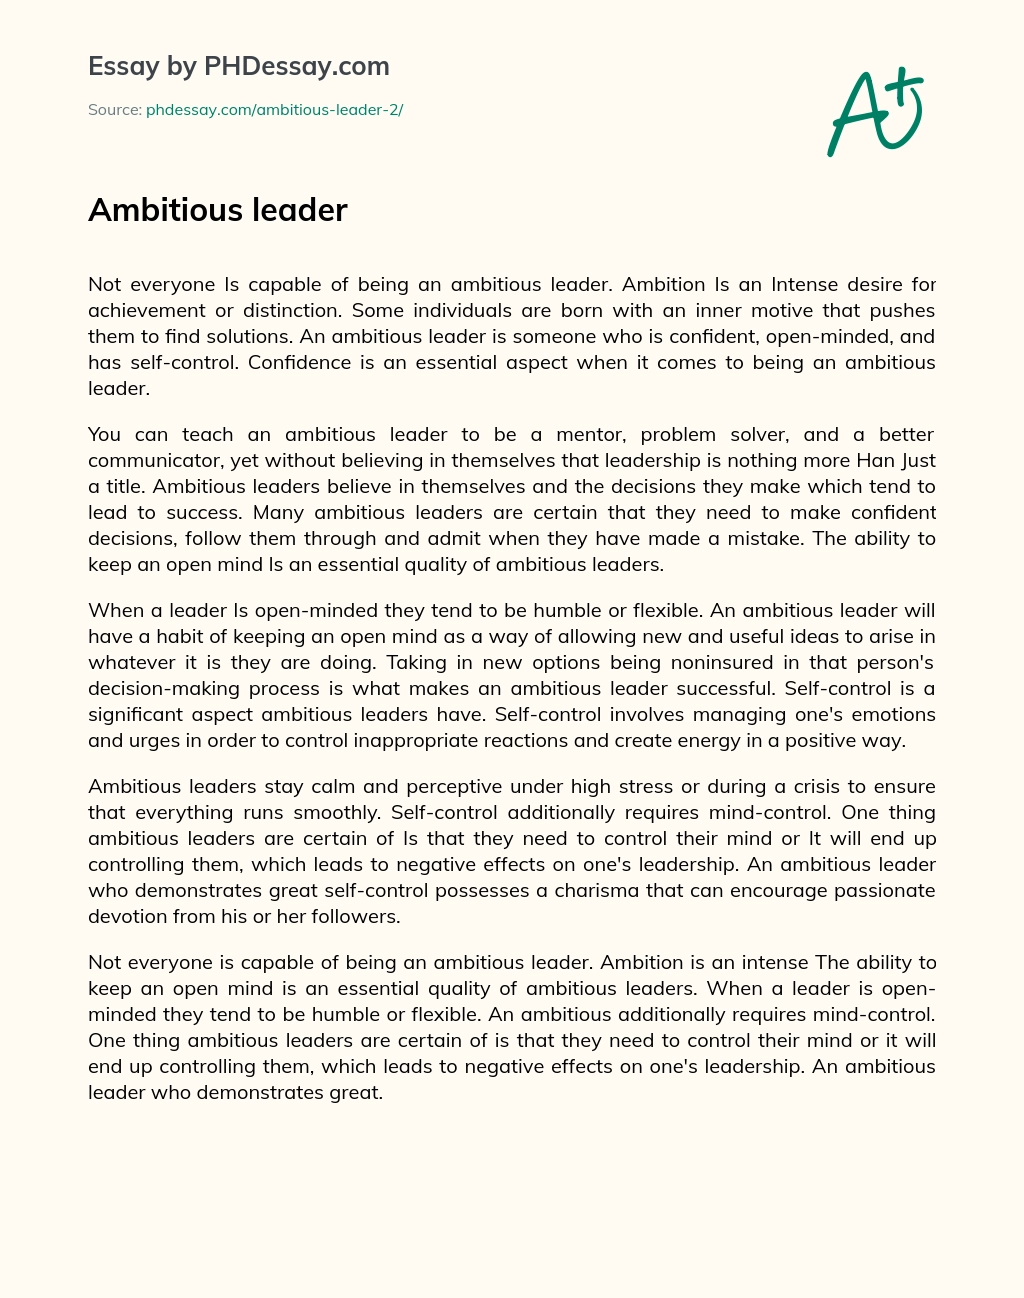 Ambitious leader essay